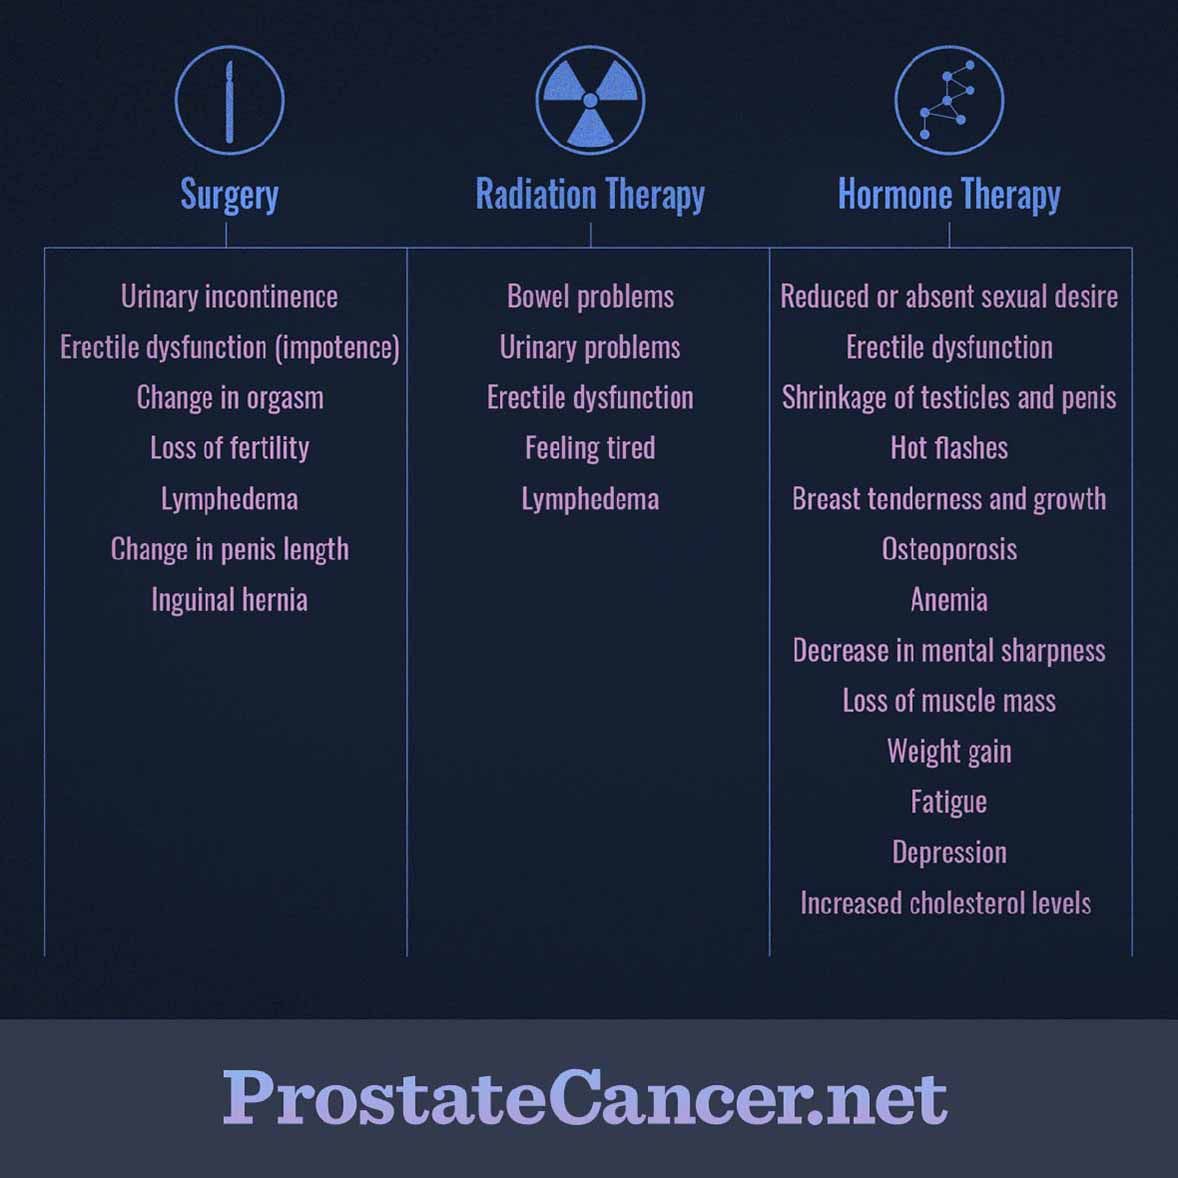 side effects of prostate cancer radiation)